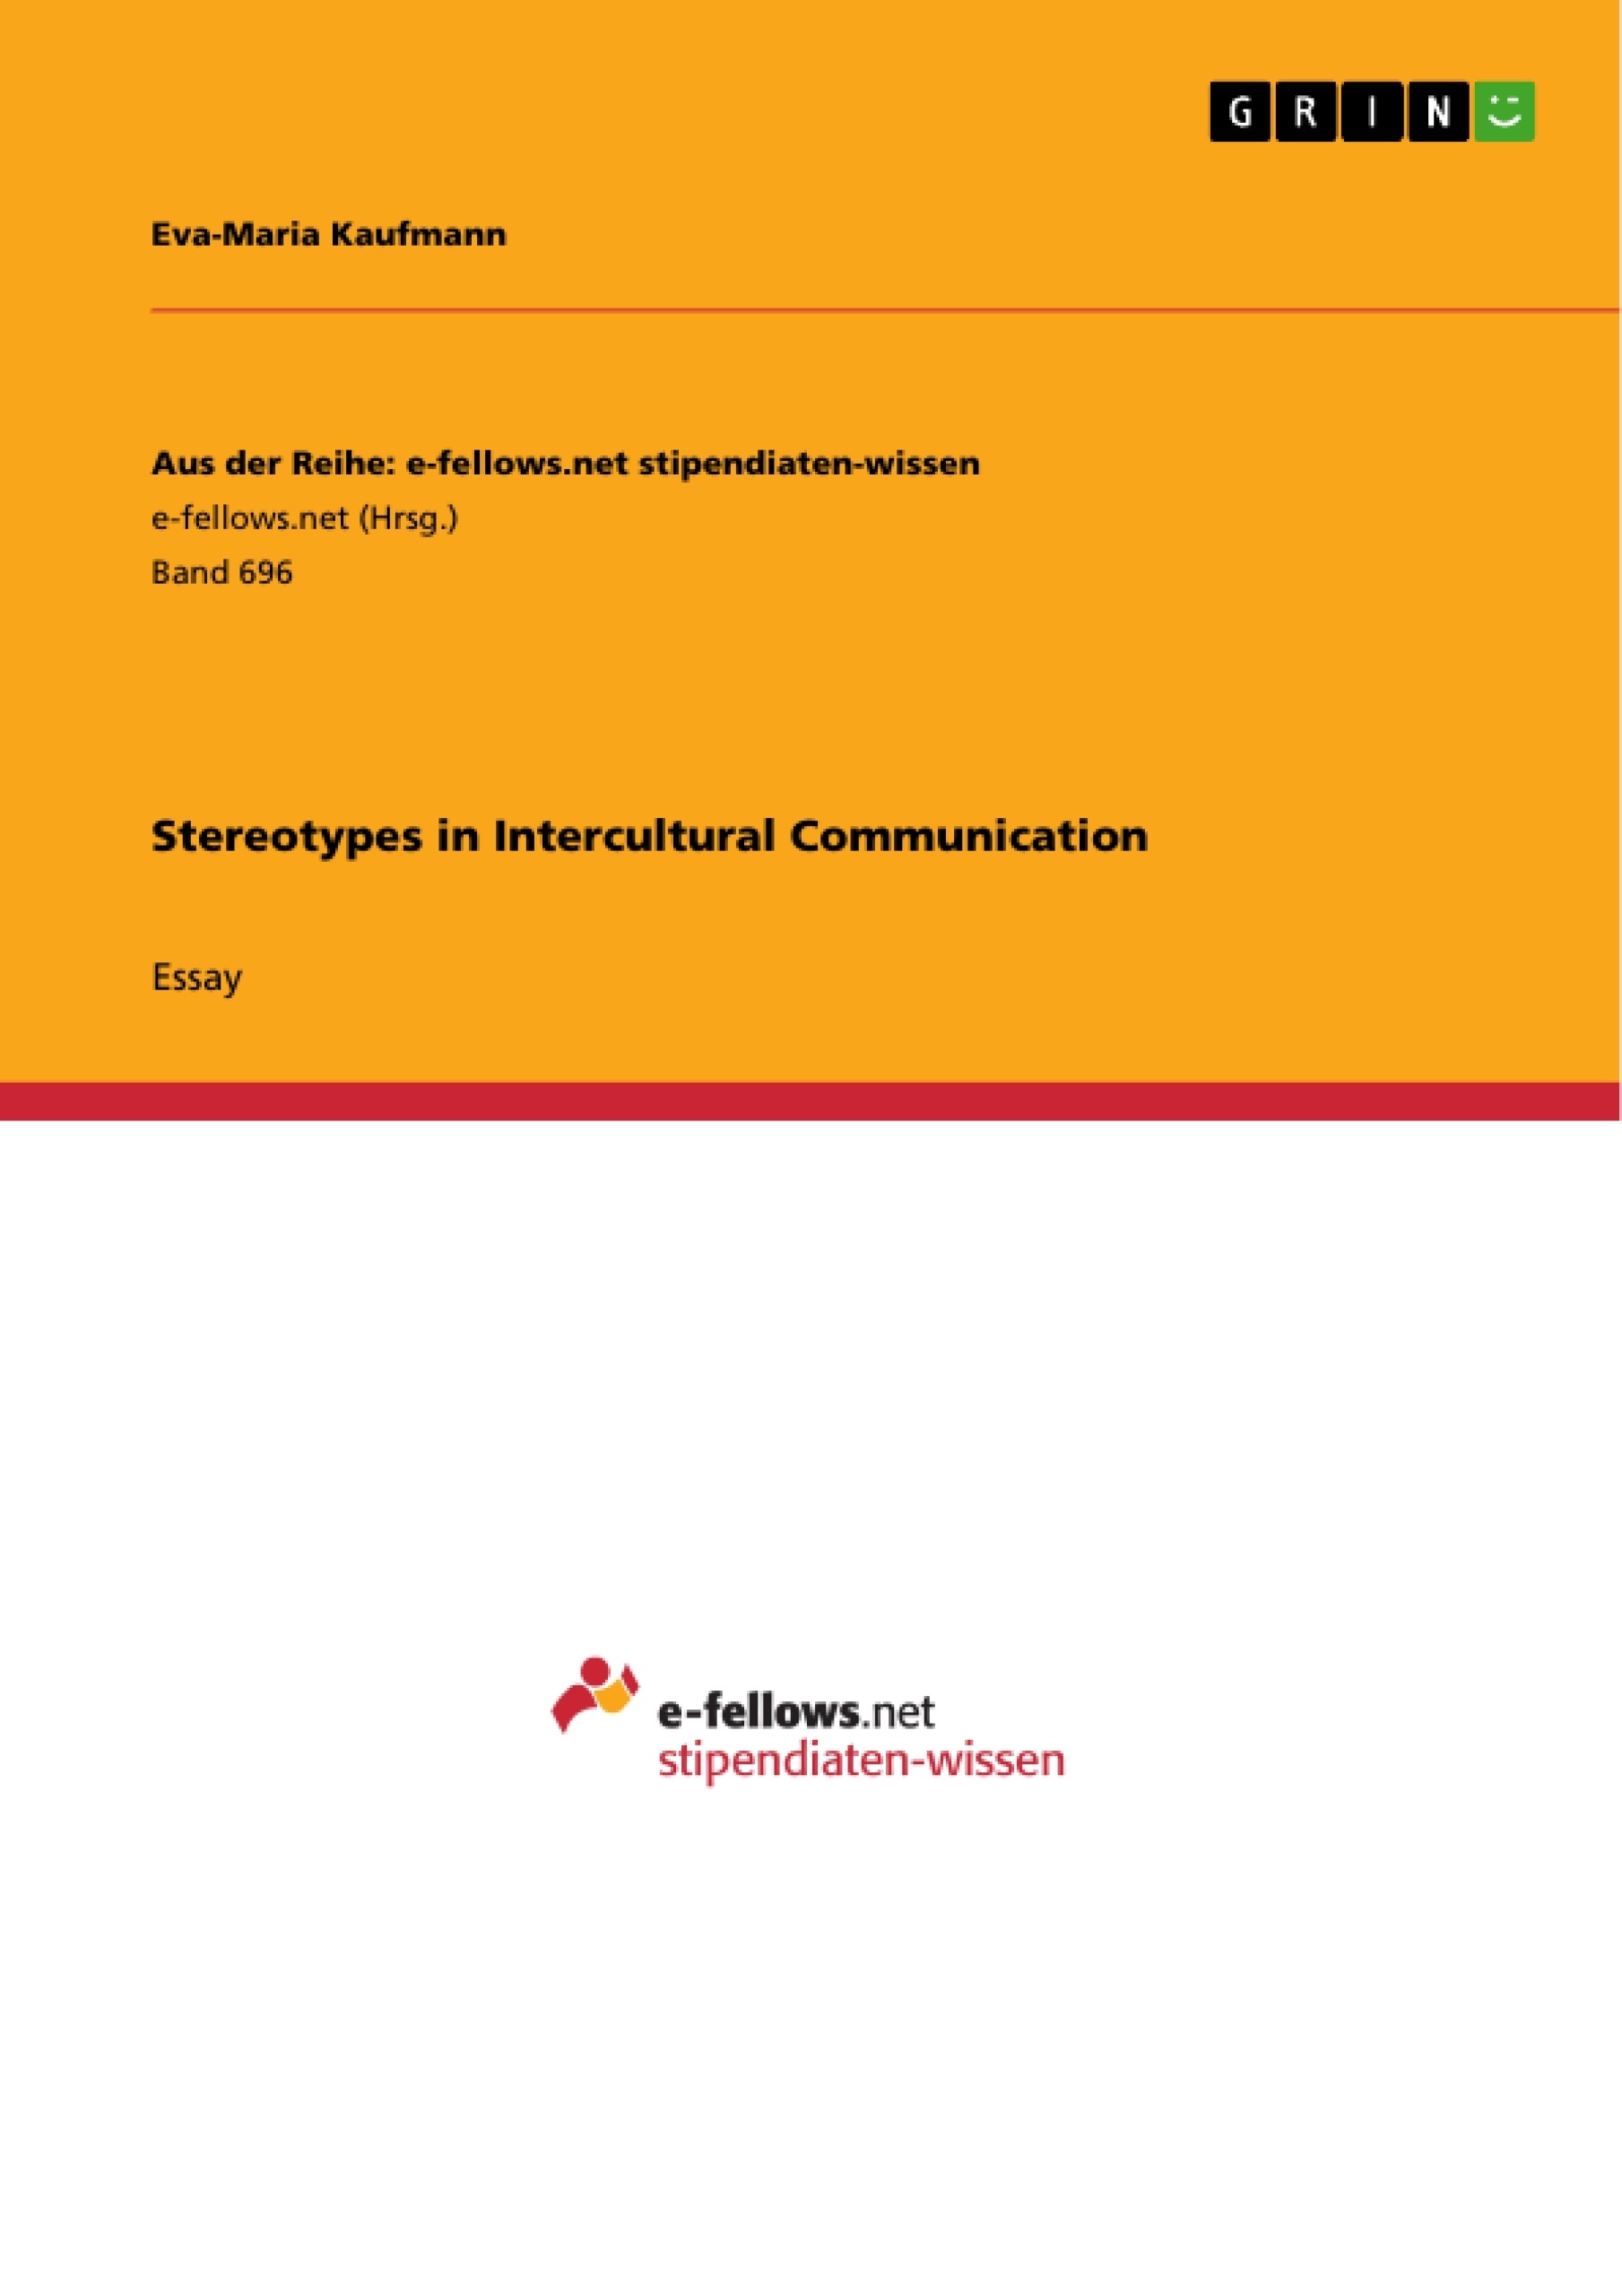 intercultural communication barriers examples